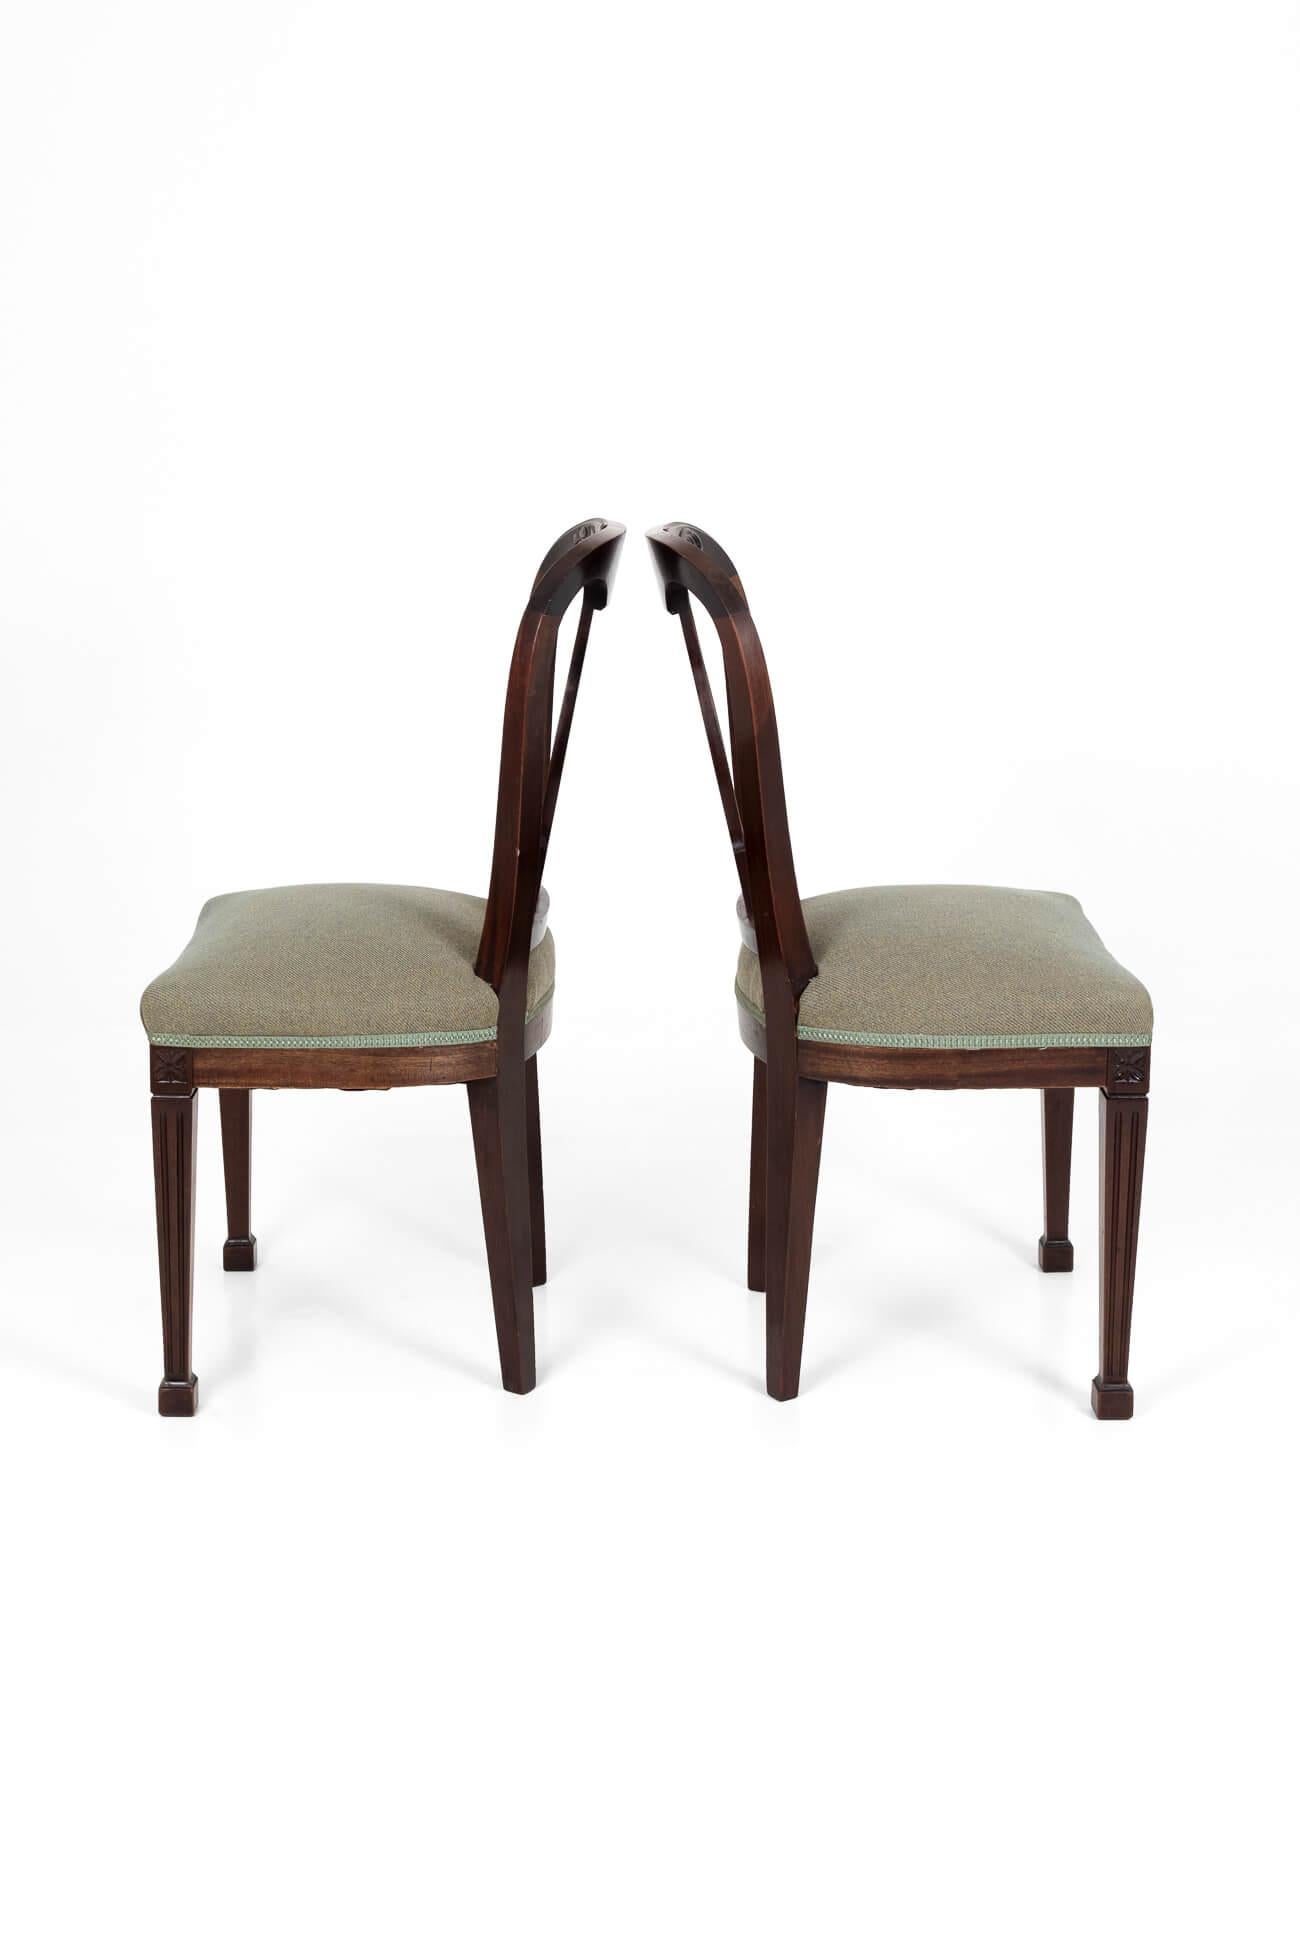 Set of 19th Century Mahogany Victorian Dining Chairs, circa 1860 In Good Condition For Sale In Faversham, GB